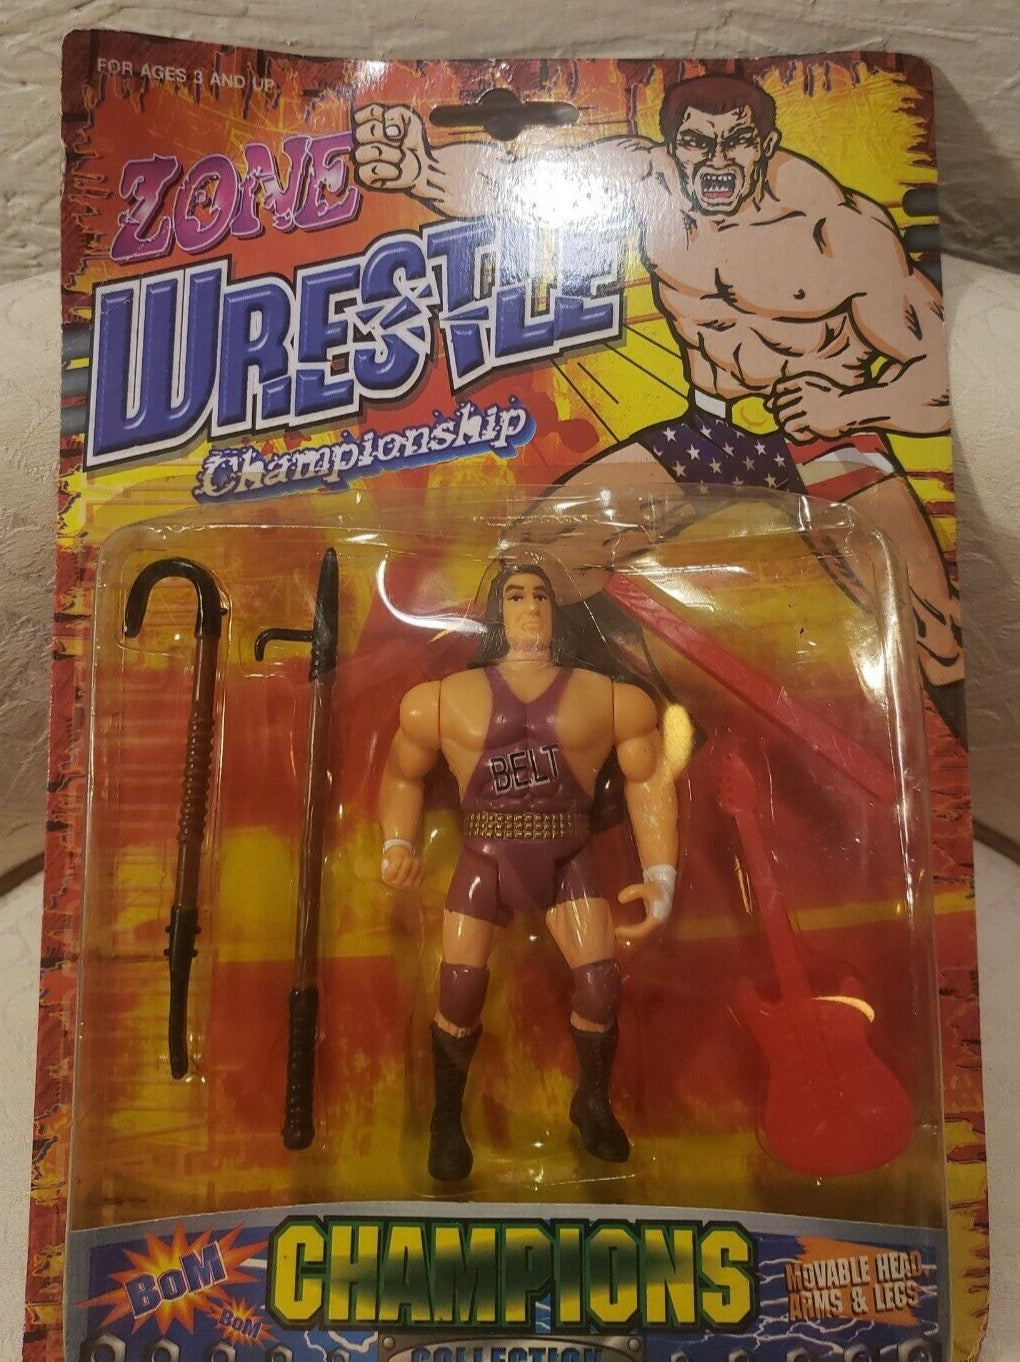 Zone Wrestle Championship Champions Collection Bootleg/Knockoff Wrestler